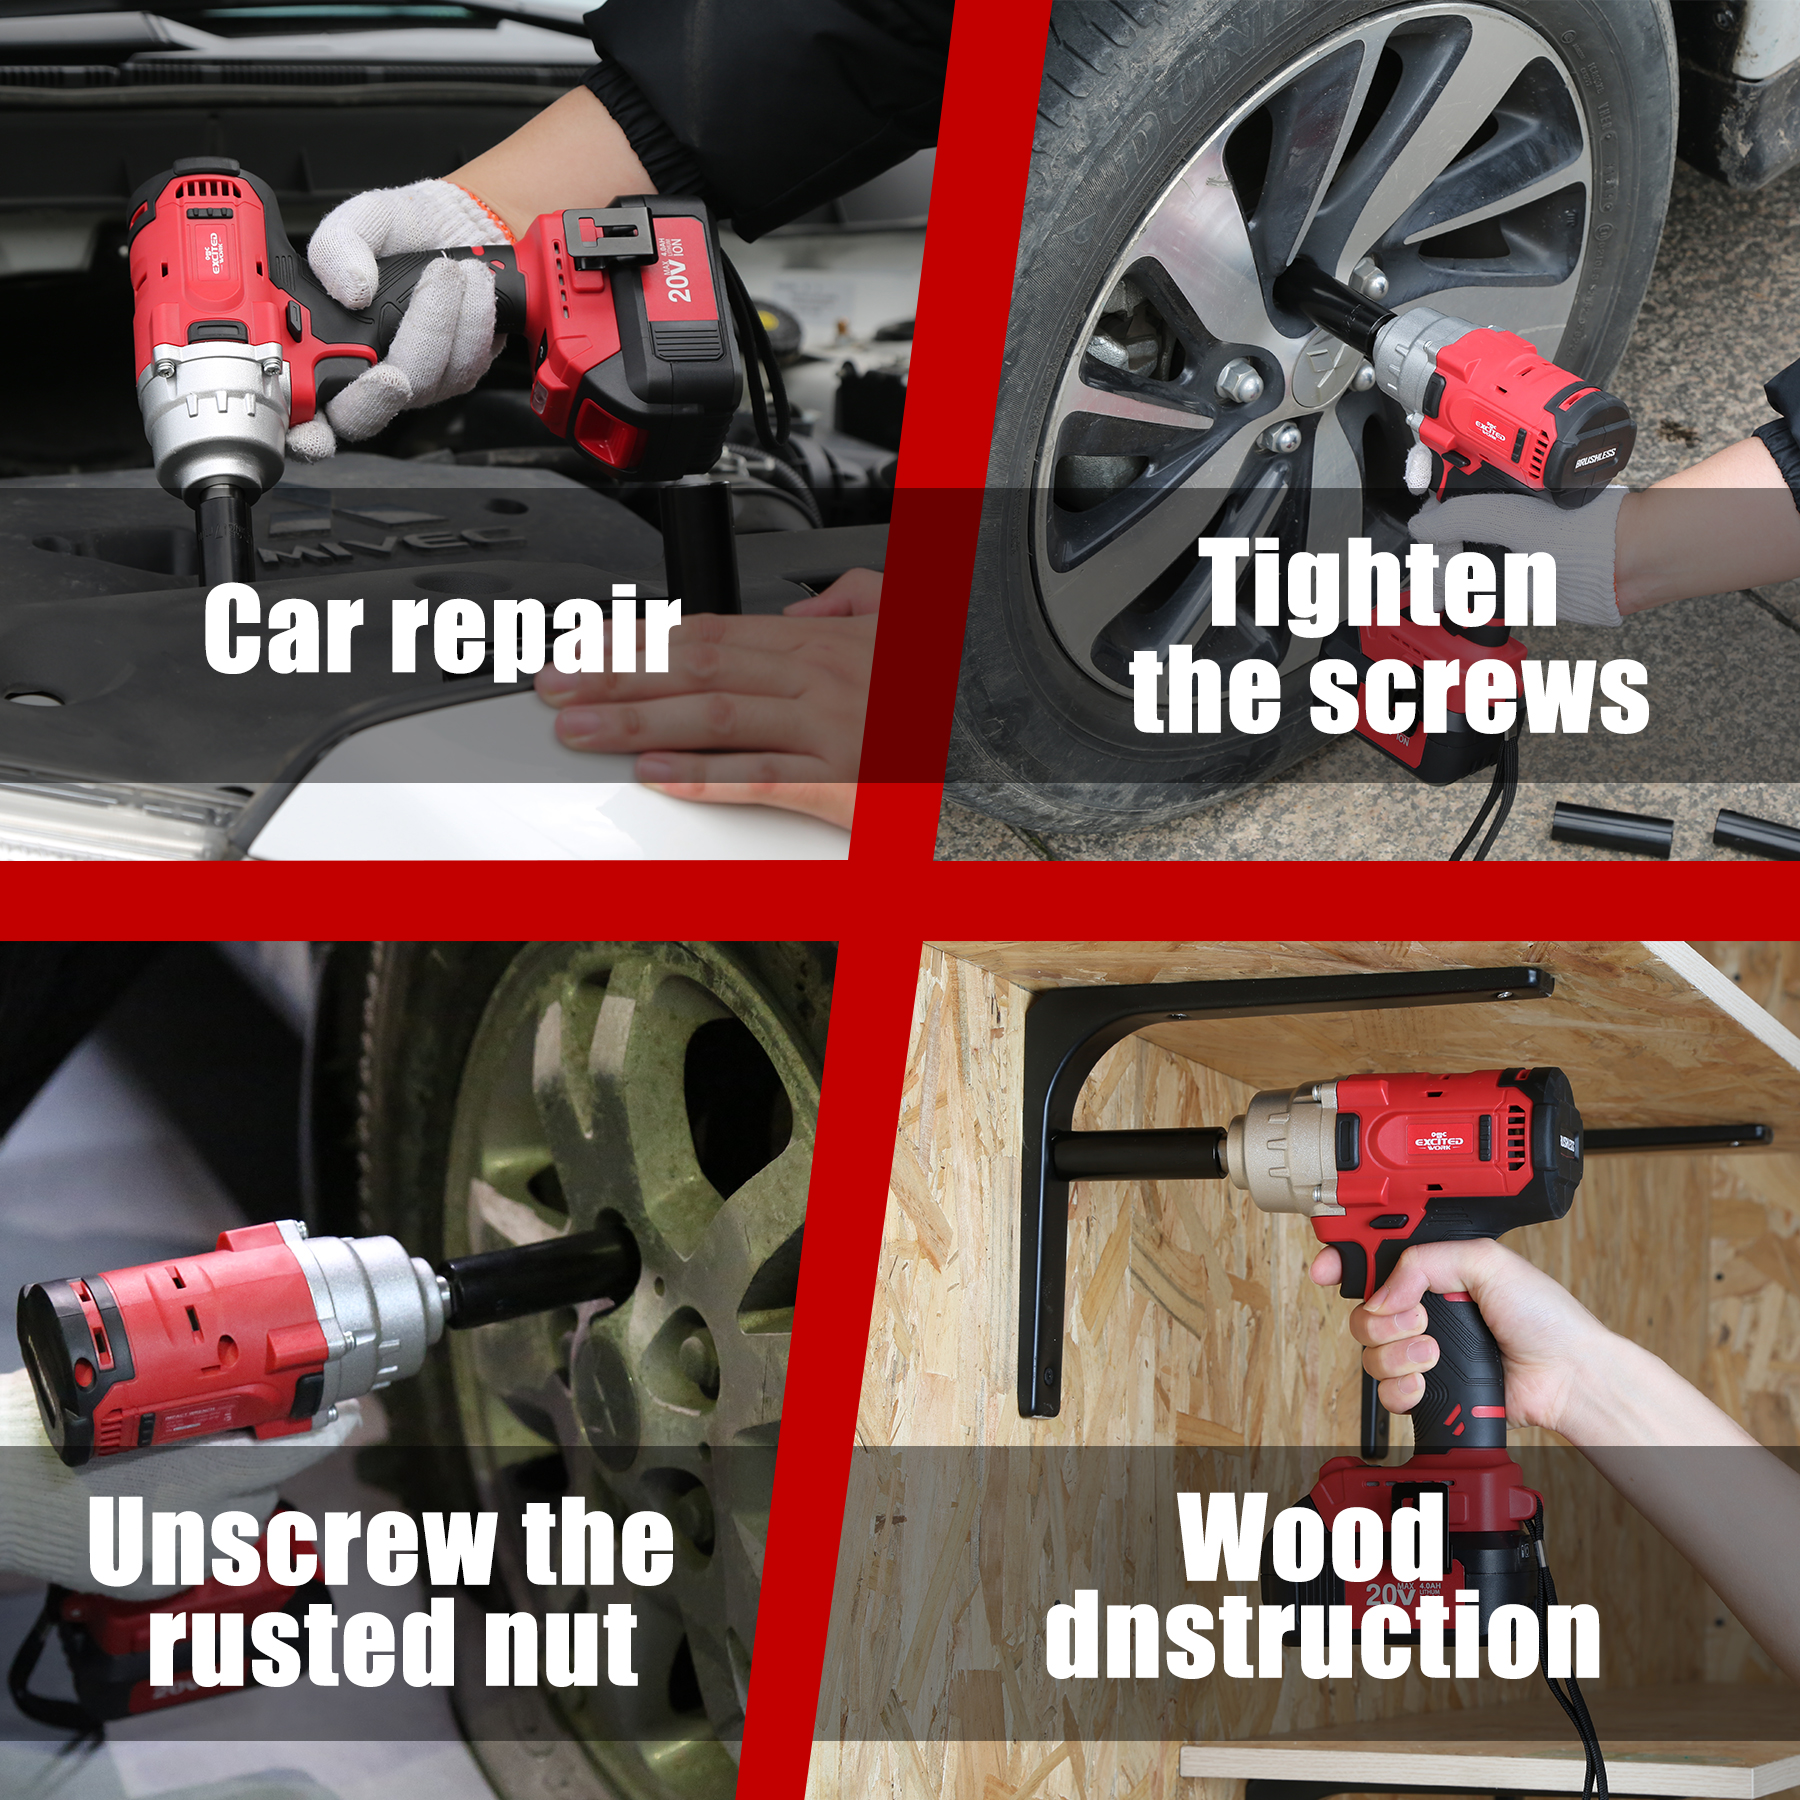 EXCITED WORK 20V MAX Brushless High Torque Impact Wrench, (500Nm)  Cordless Impact Gun, Outdoor Auto Tire Repair Power Tool